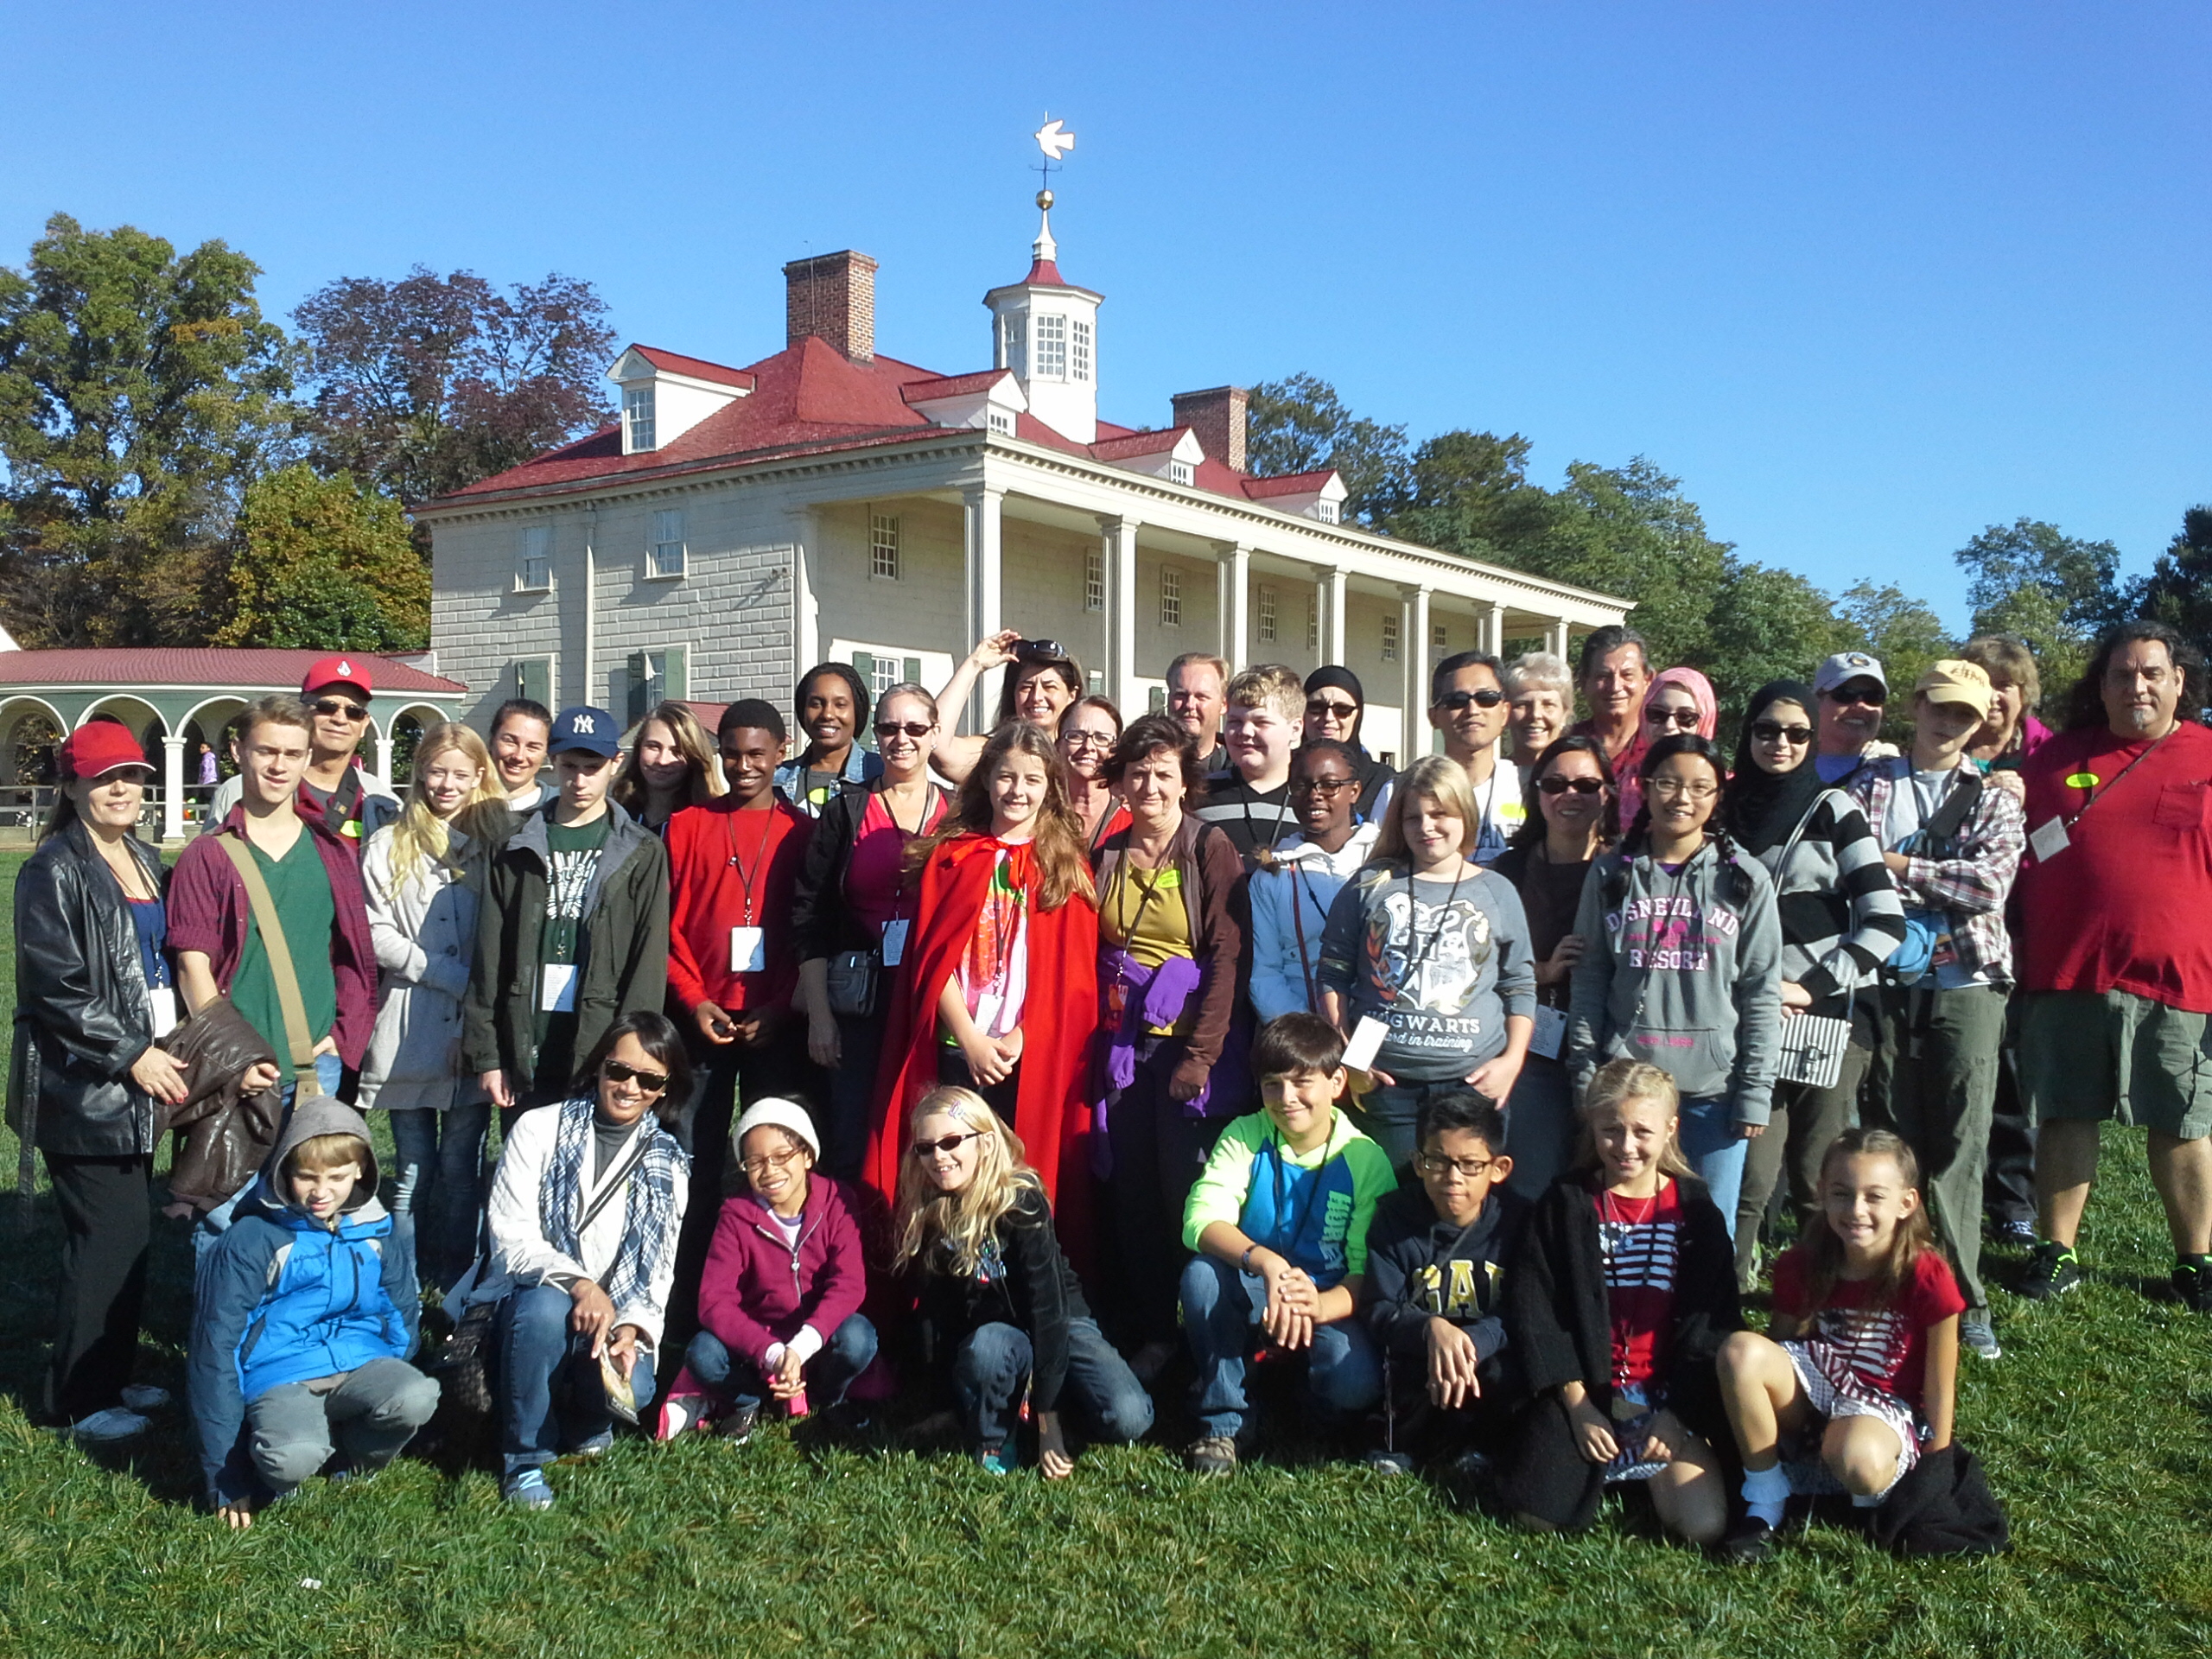 Middle school students posing for photo in front of historical Mt Vernon house